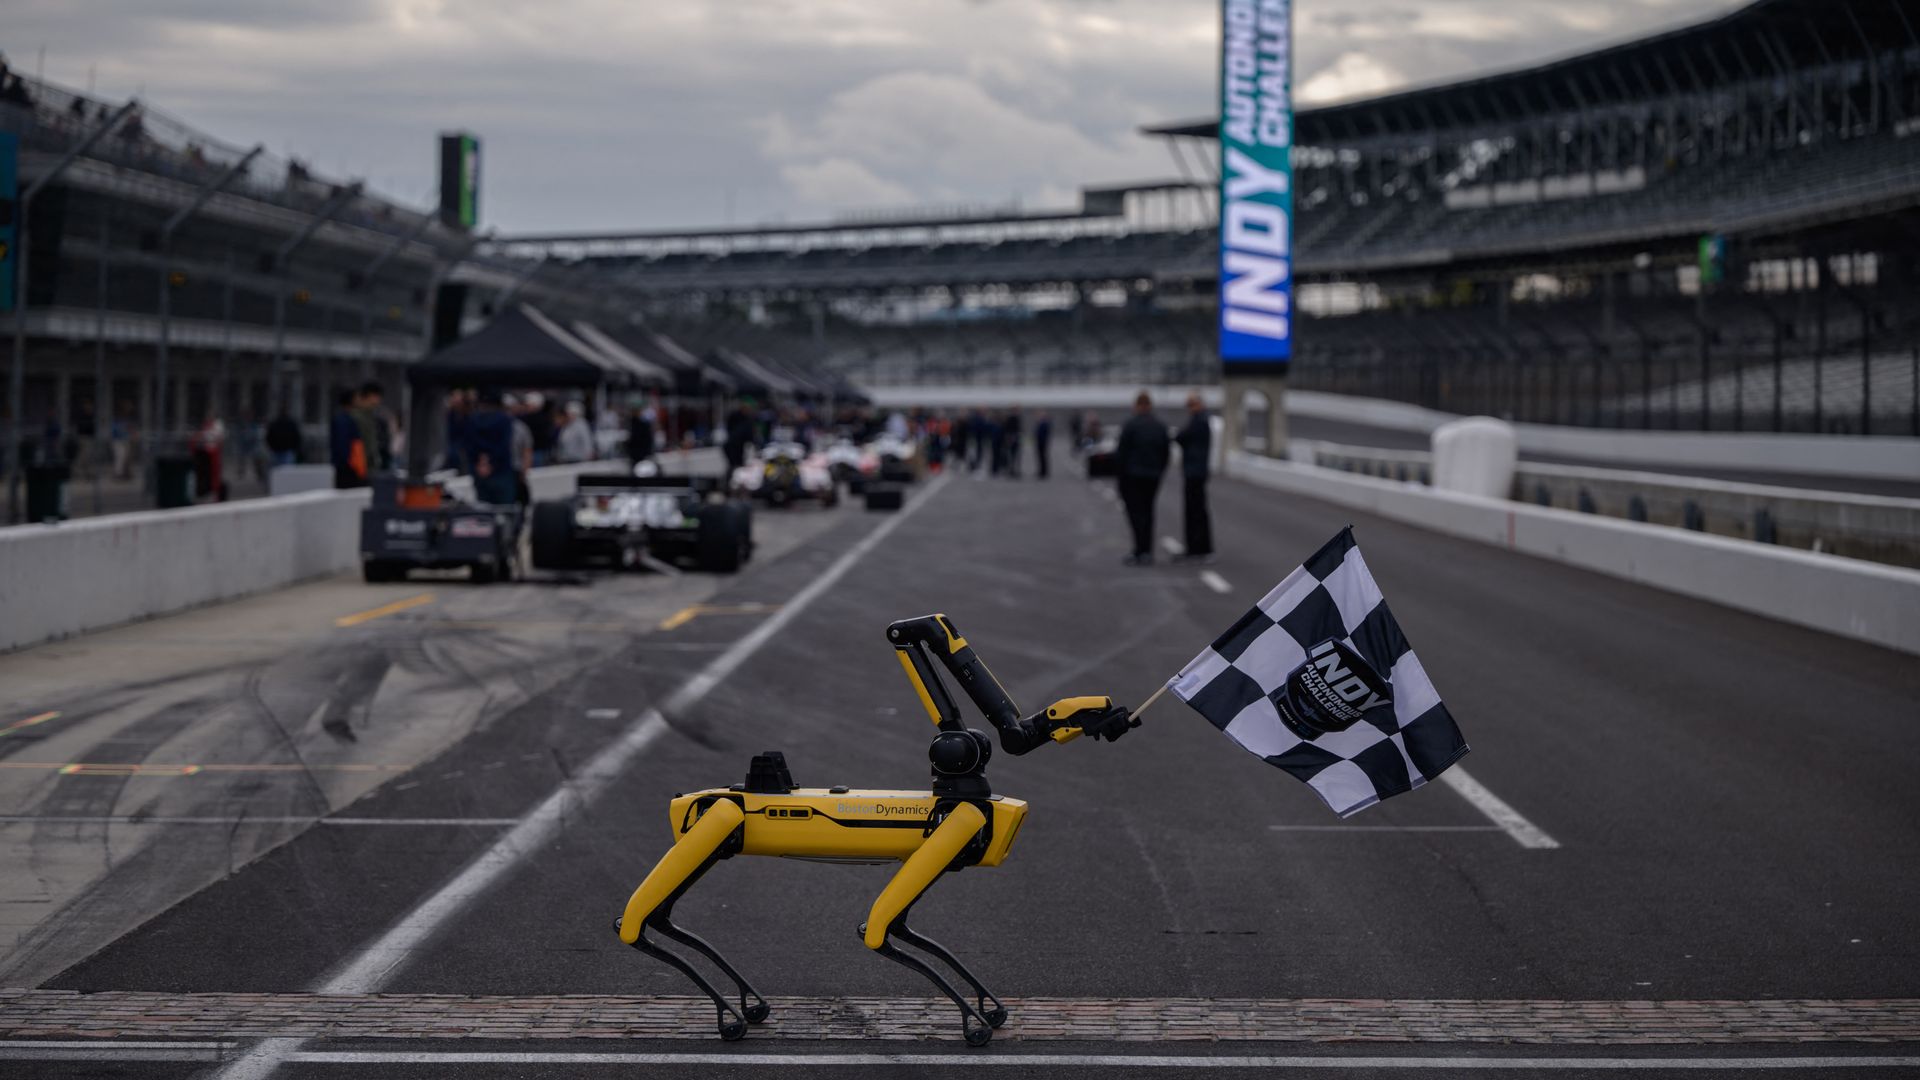 A Boston Dynamics' robot dog hold the starting flag on the grid of the Indy Autonomous Challenge race at the Indianapolis Speedway in Indianapolis on October 23, 2021. 